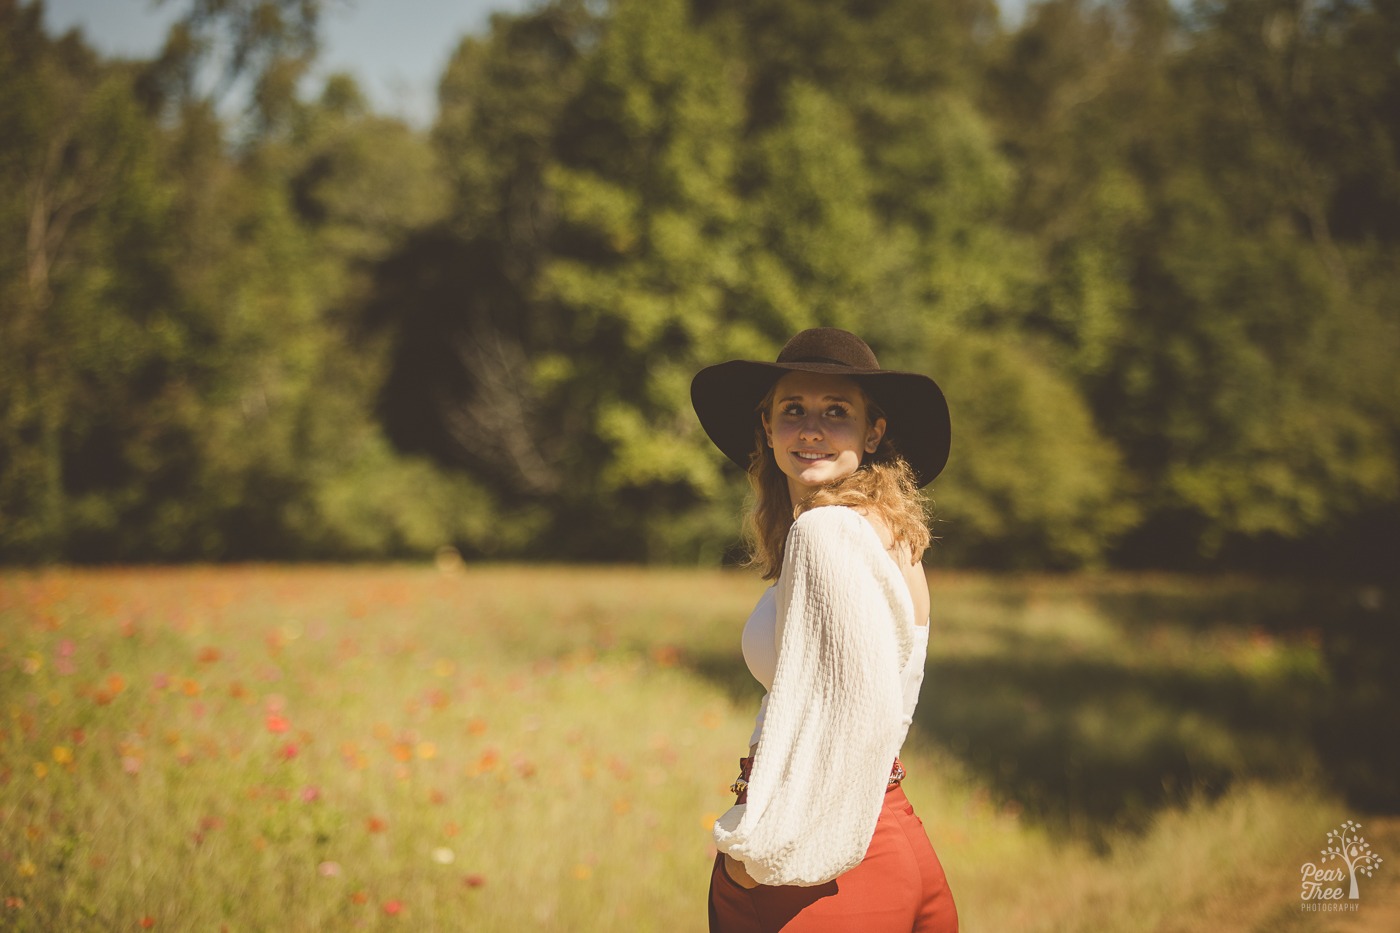 Beautiful oung woman standing in a flower field wearing a hat and looking back over her shoulder